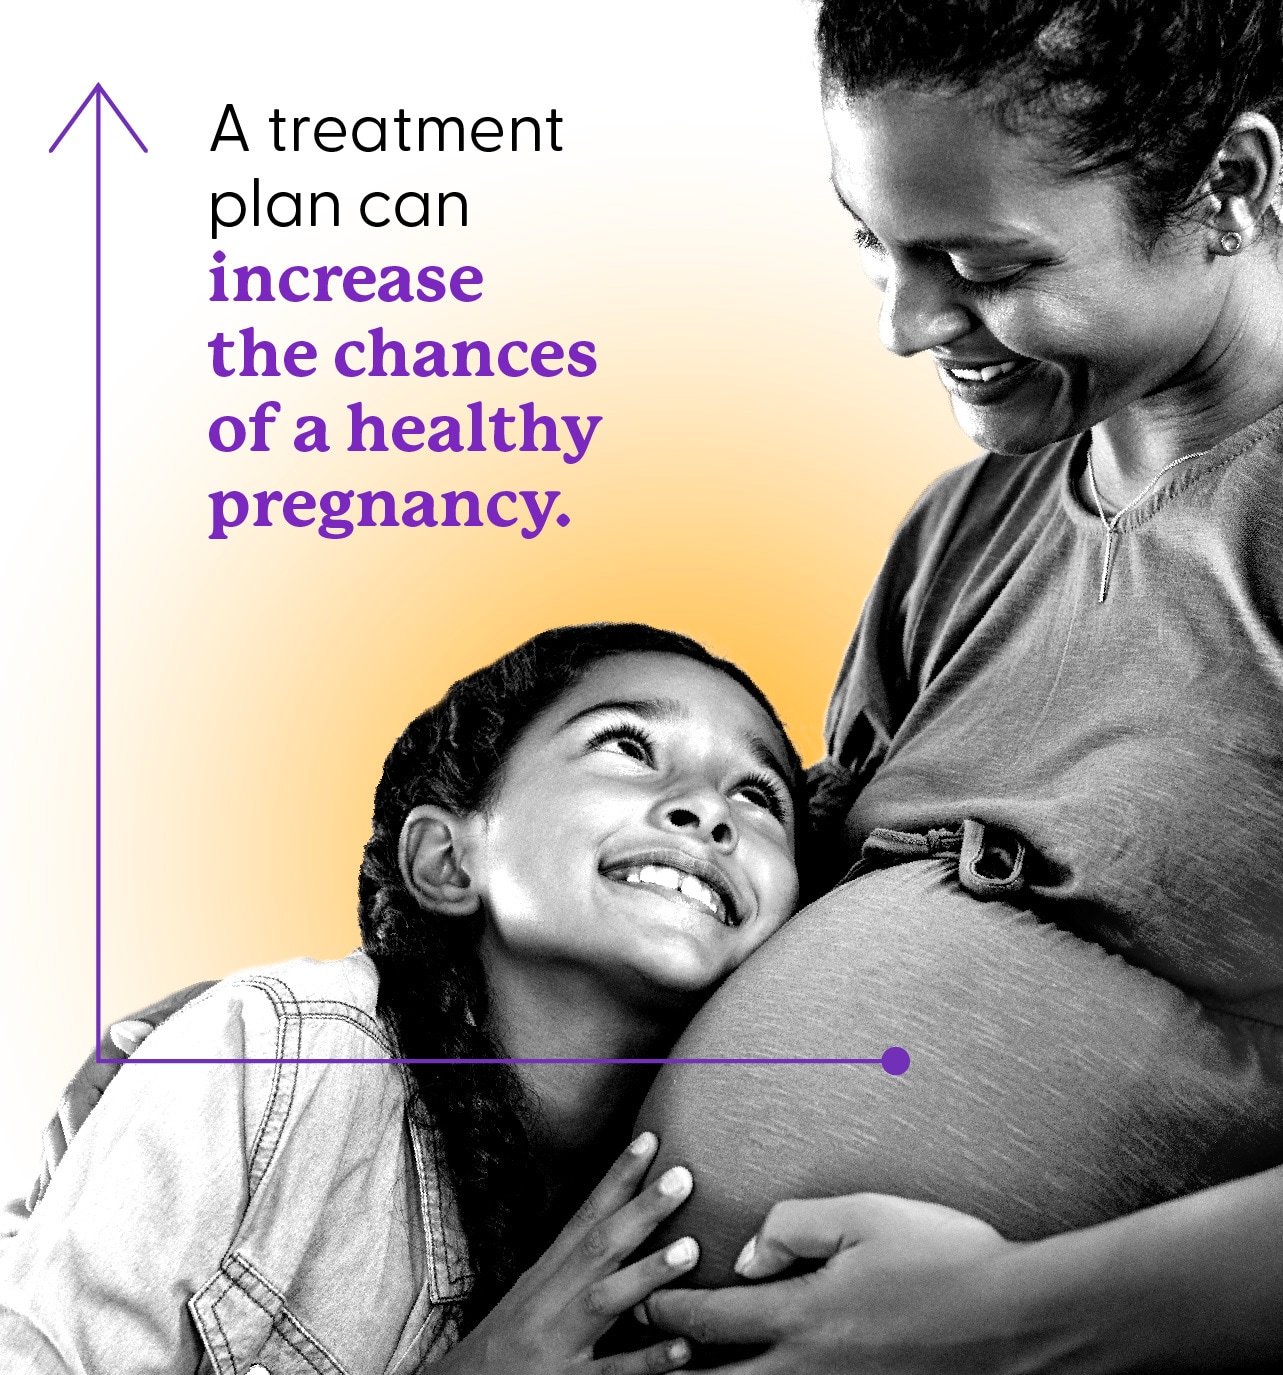 A treatment plan can increase the chances of a healthy pregnancy.